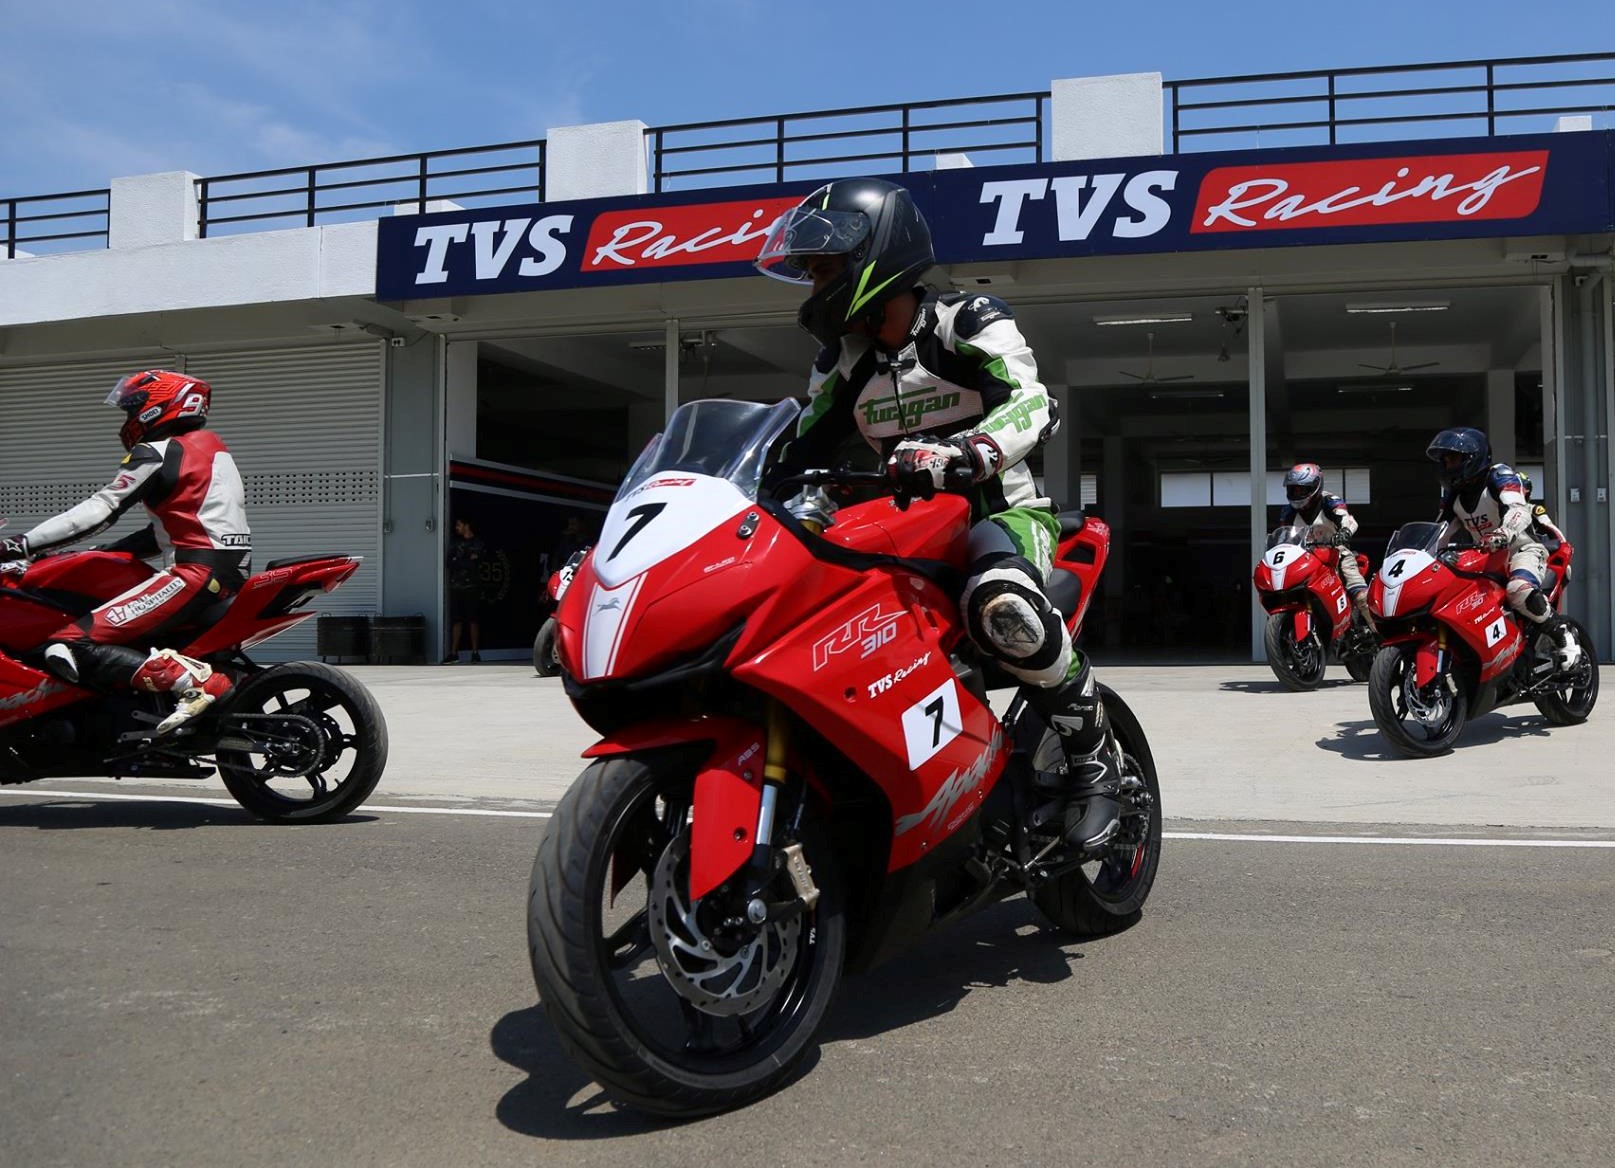 45HP TVS Apache RR 310 Race Version Officially Unveiled - foreground